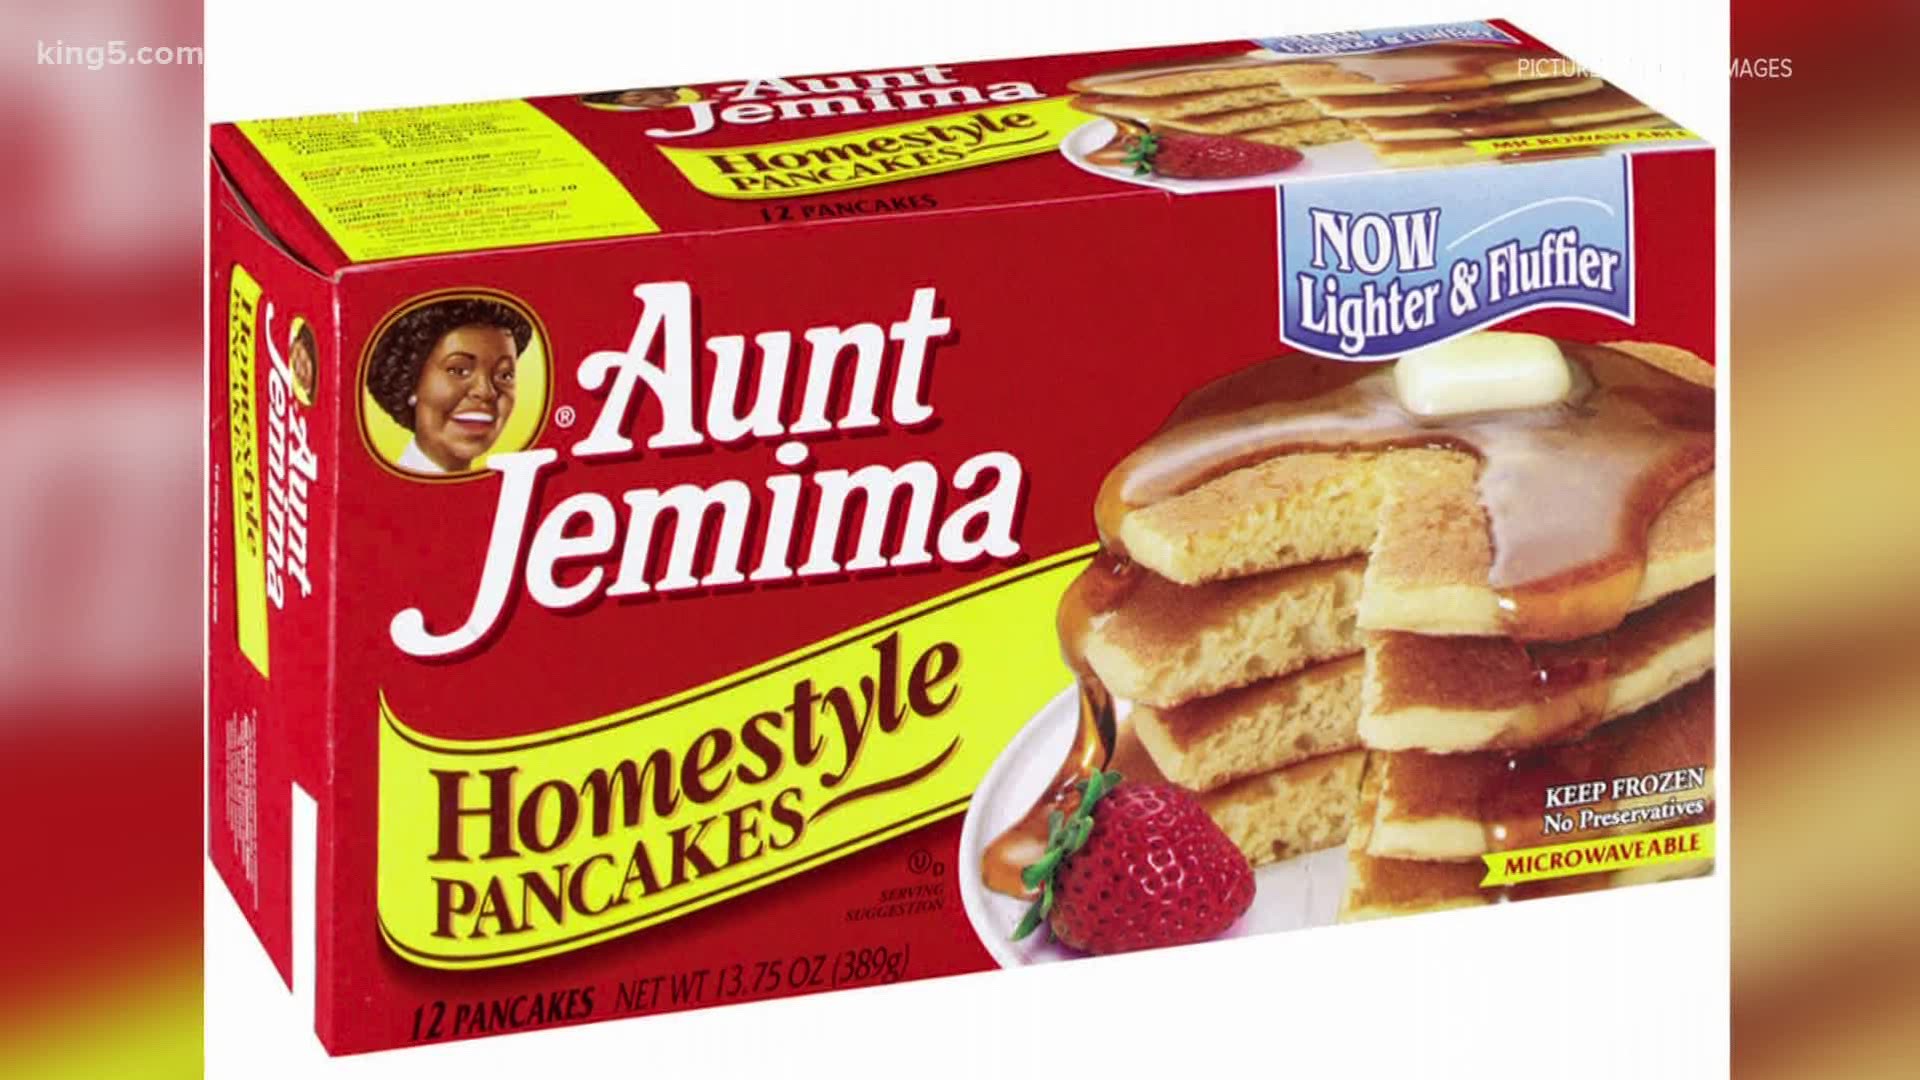 Quaker Oats, who makes Aunt Jemima products,  acknowledges the mascot and name are based on a racial stereotype.  New packaging is expected to be out by fall 2021.